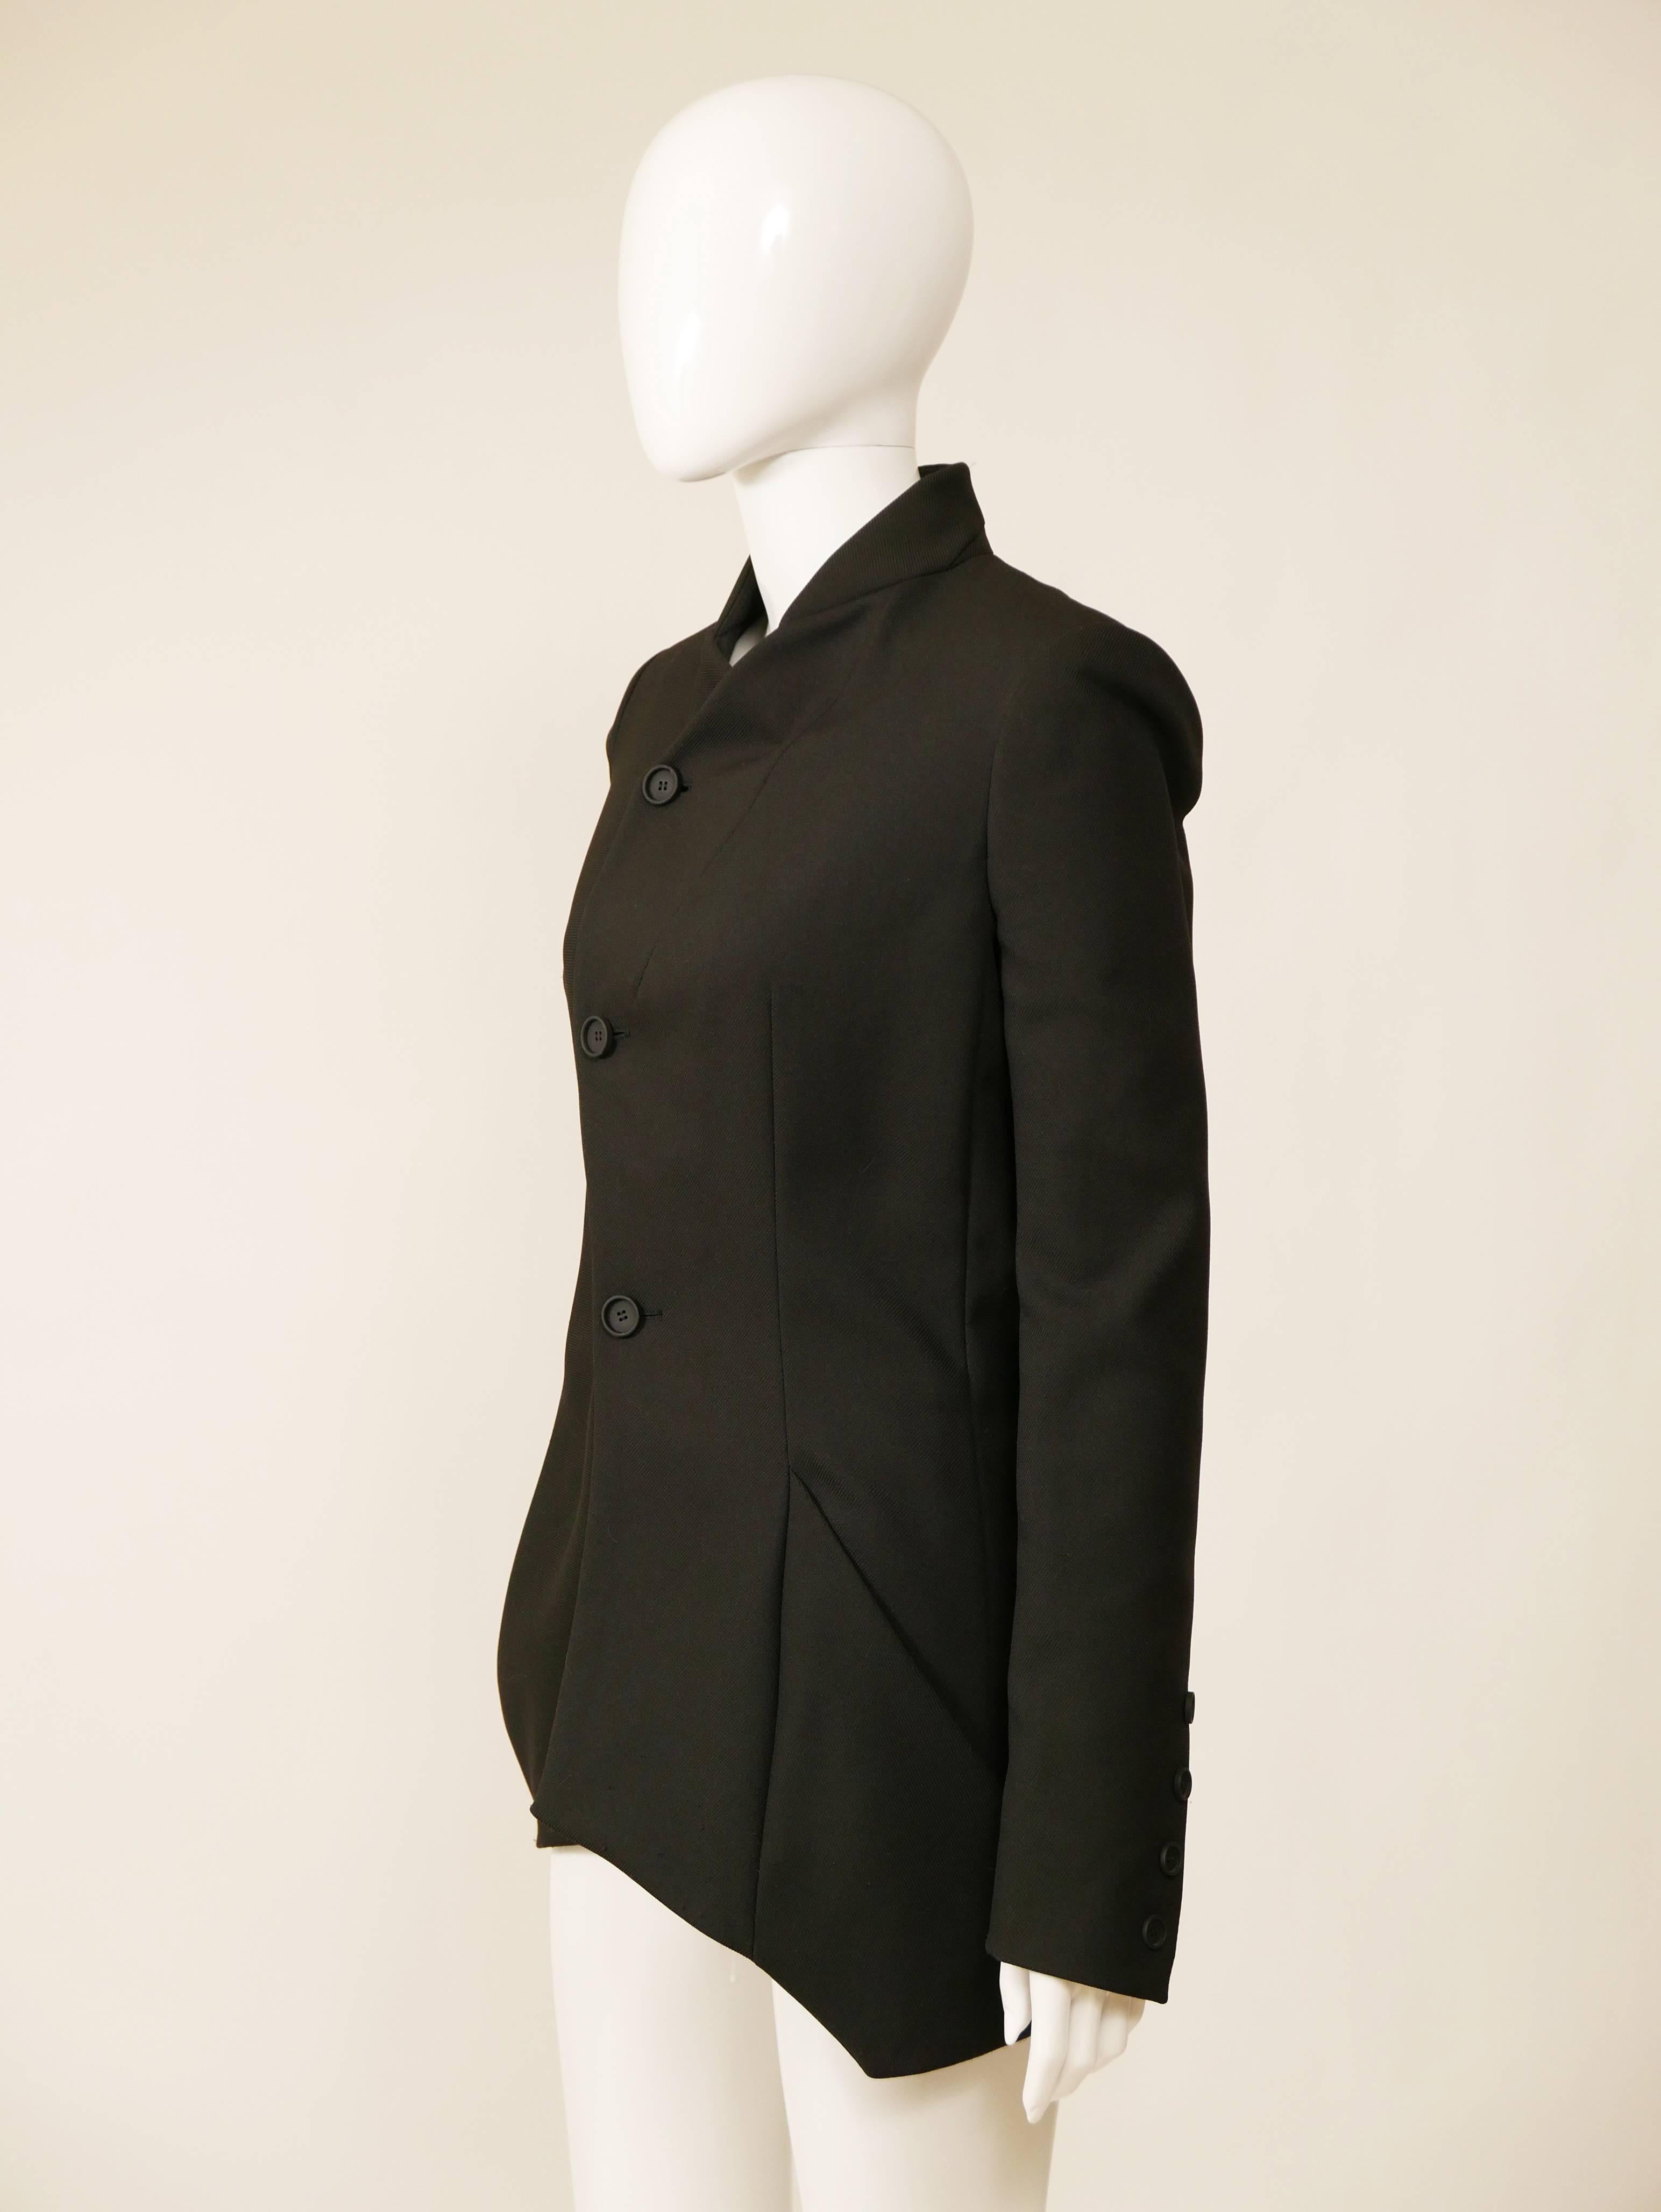 This amazing blazer jacket is in a black pique fabric. It has asymmetric line, buttons closure and is fully lined with black satin. 

Measurement:
Label size 40 Italian
Estimeted size S/M
Shoulder 15 inch
Bust 34 inch
Sleeve 26 inch
Total